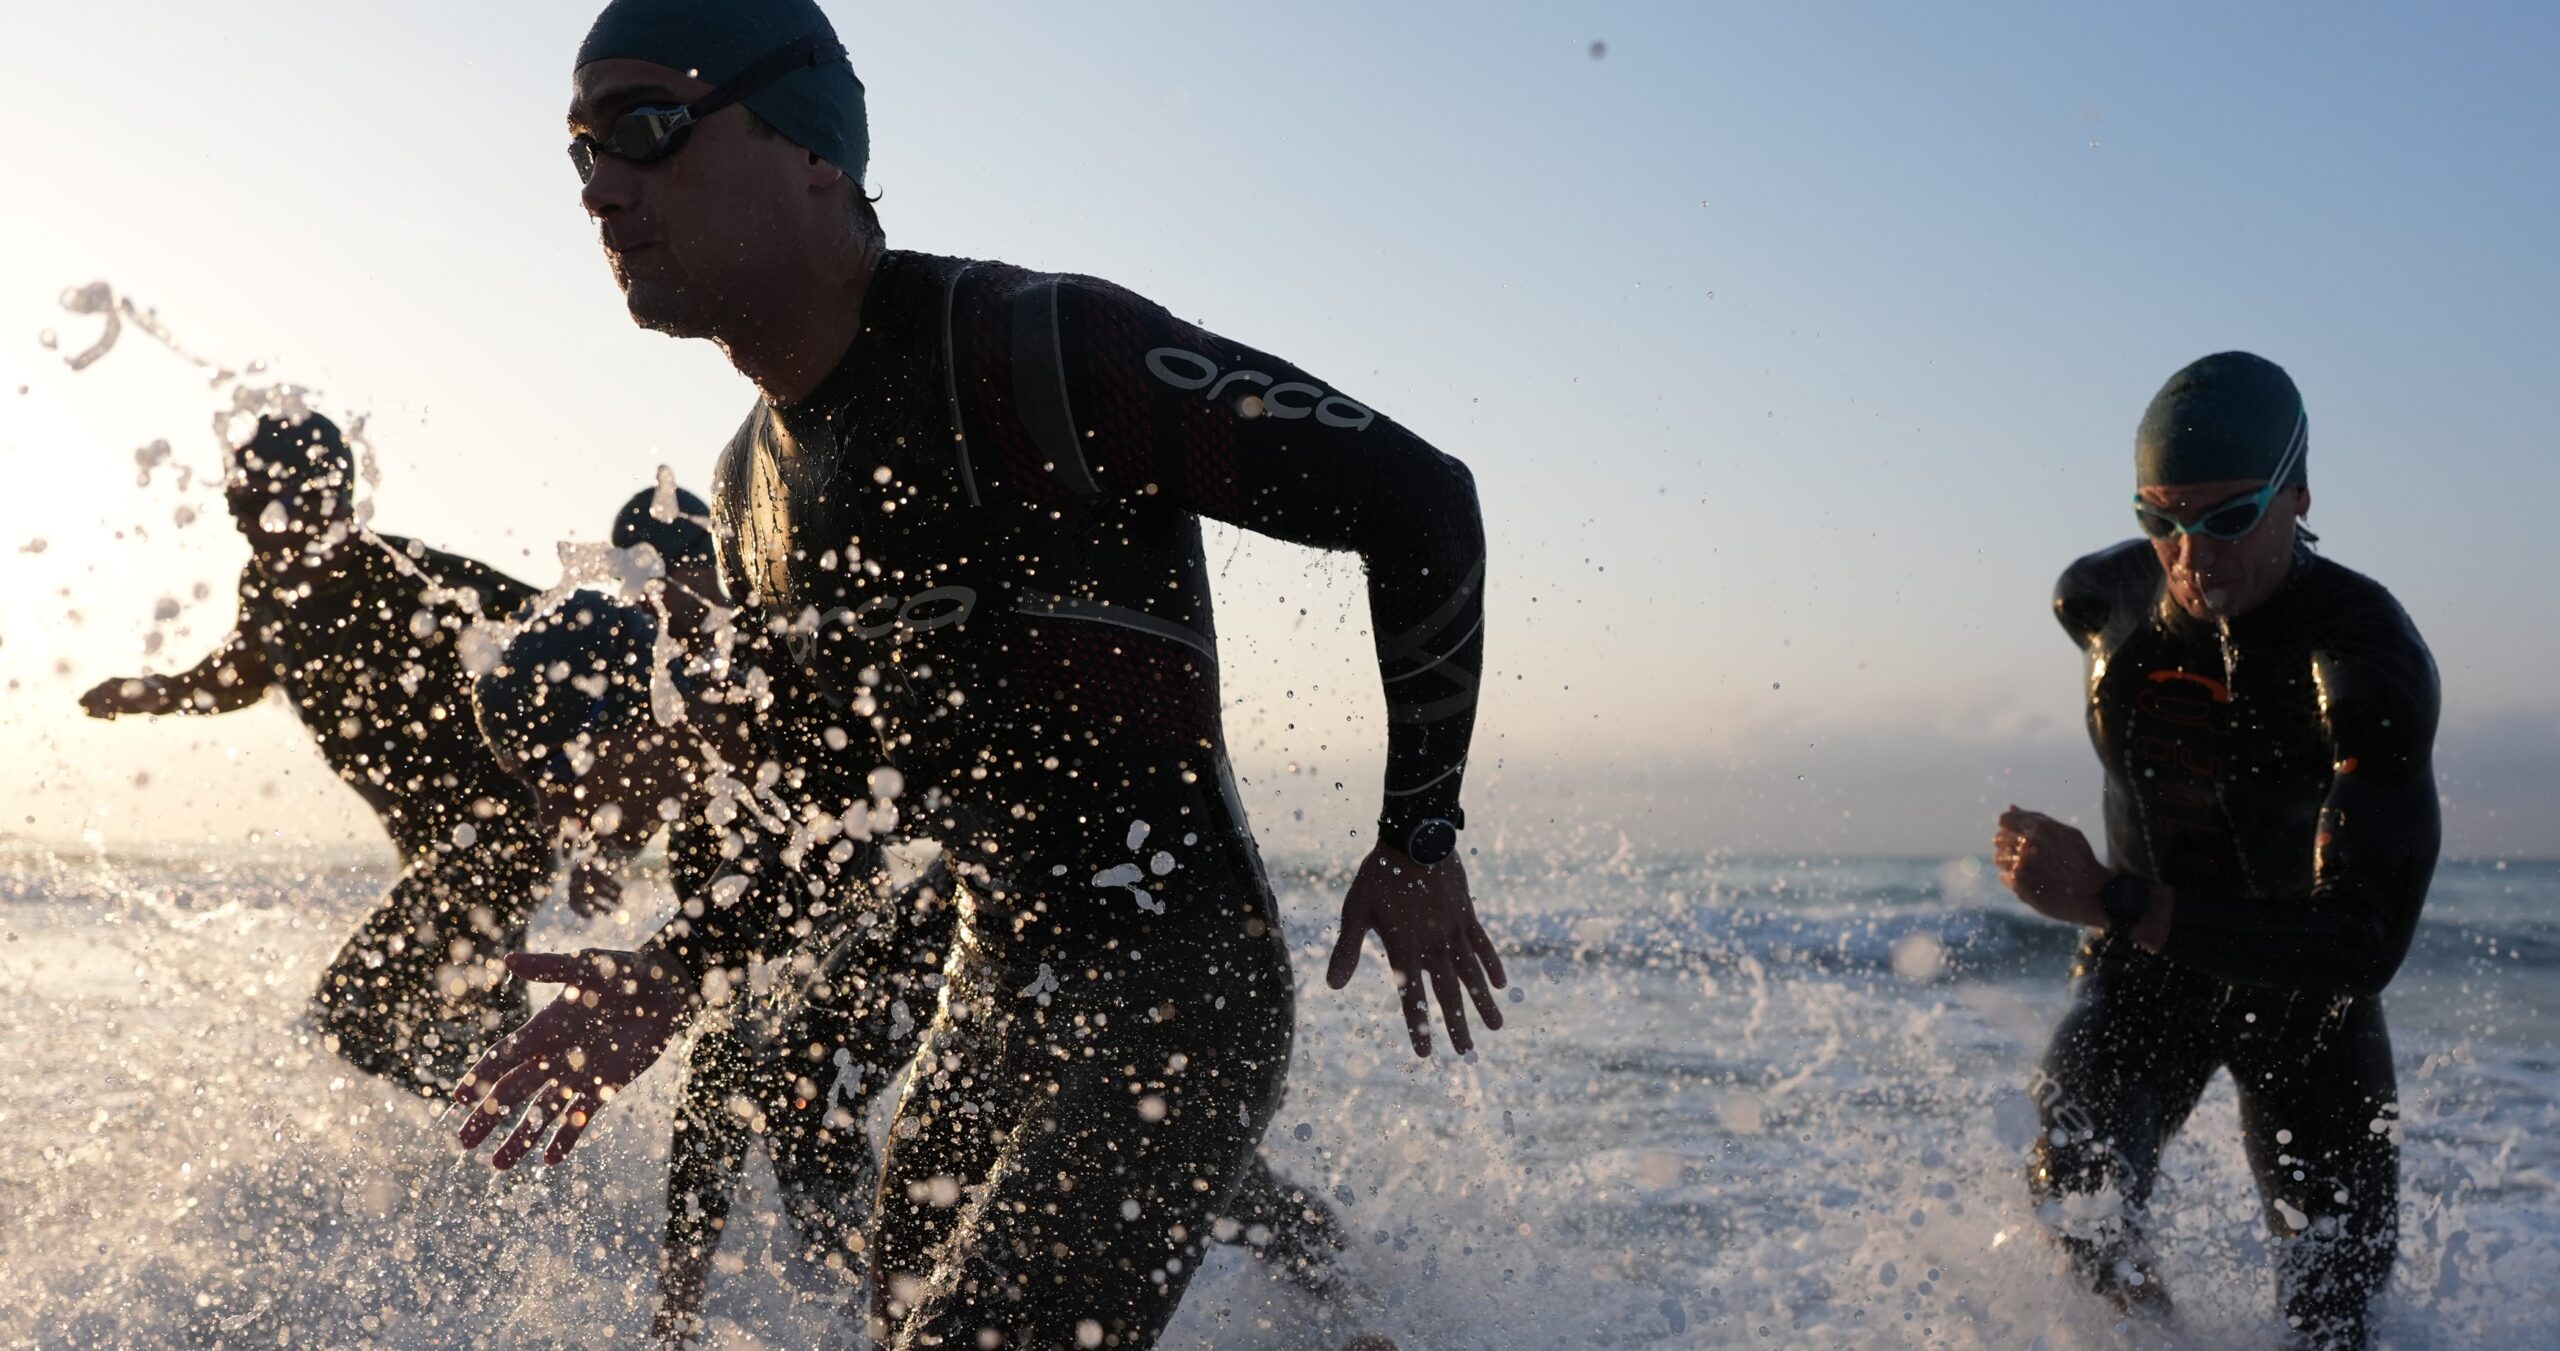 Image taken with Alpha 9 III camera from Sony of men and women taking part in a triathlon